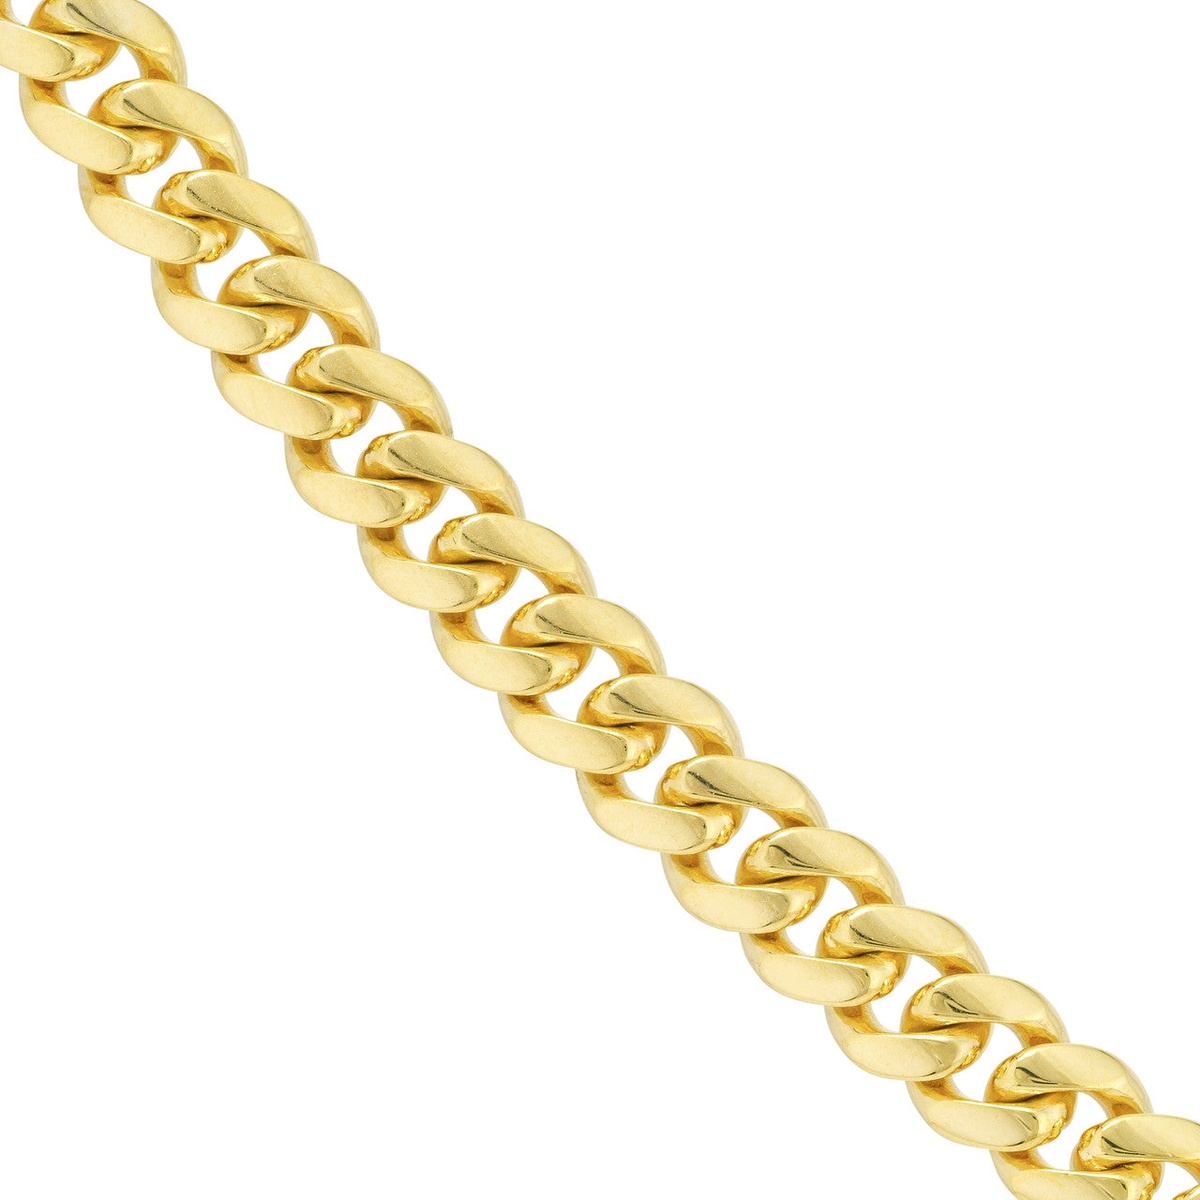 What Is the Meaning Behind Wearing Gold Chains for Men?